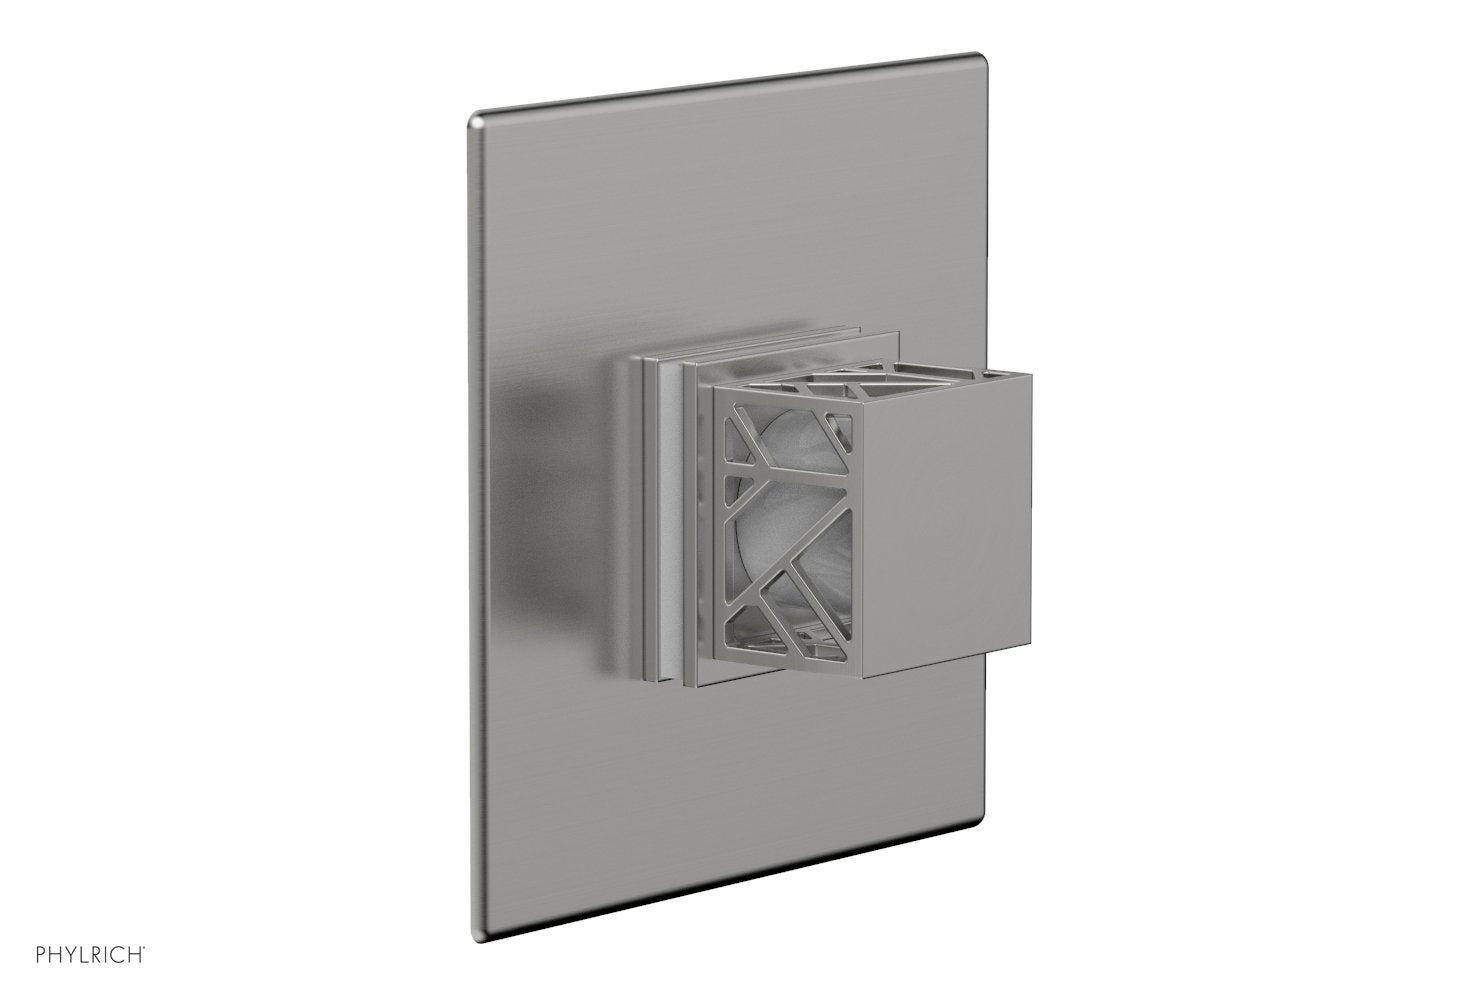 Phylrich JOLIE Thermostatic Shower Trim, Square Handle with "White" Accents